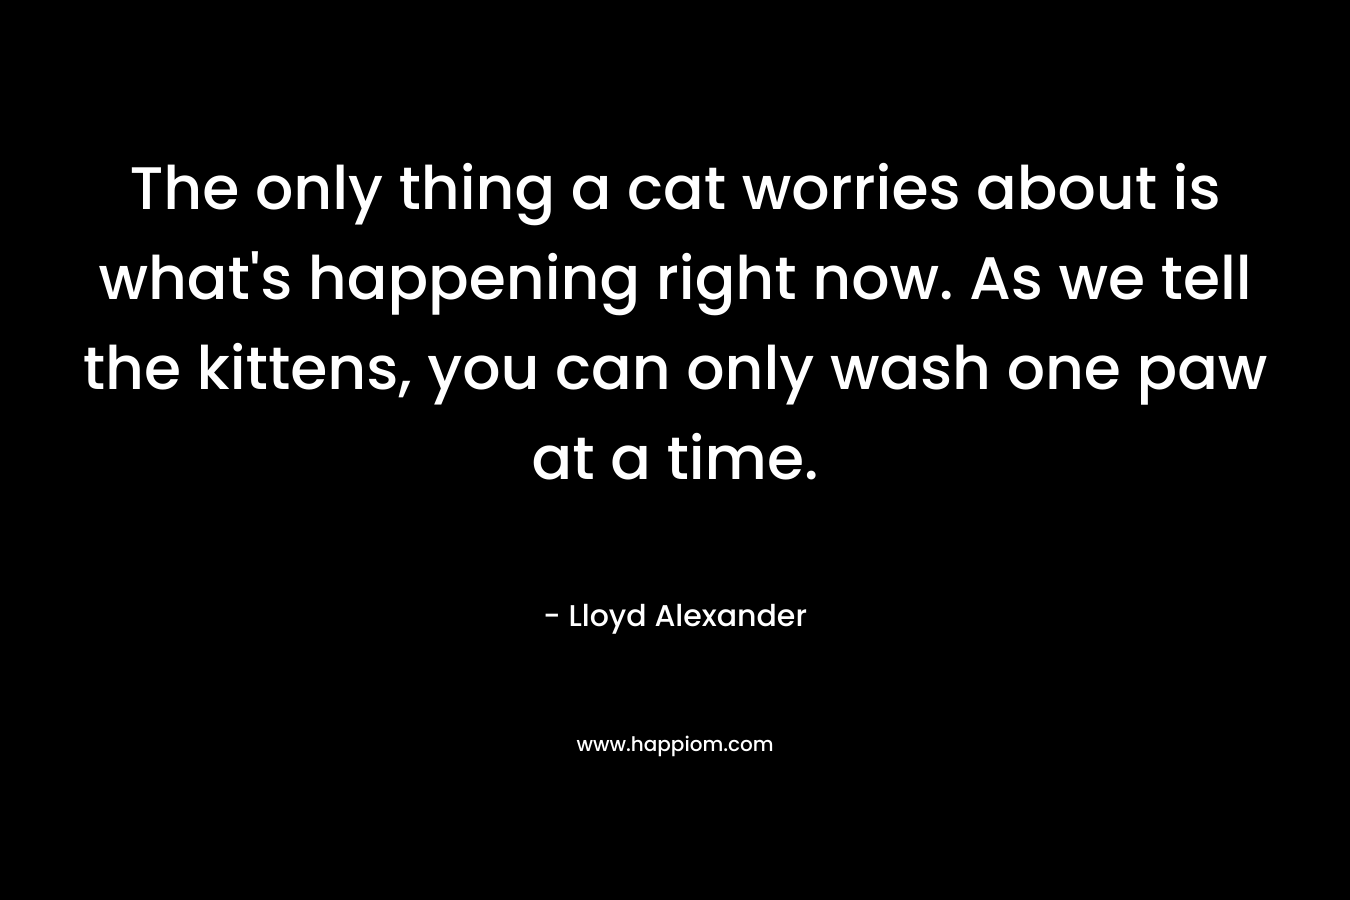 The only thing a cat worries about is what’s happening right now. As we tell the kittens, you can only wash one paw at a time. – Lloyd Alexander